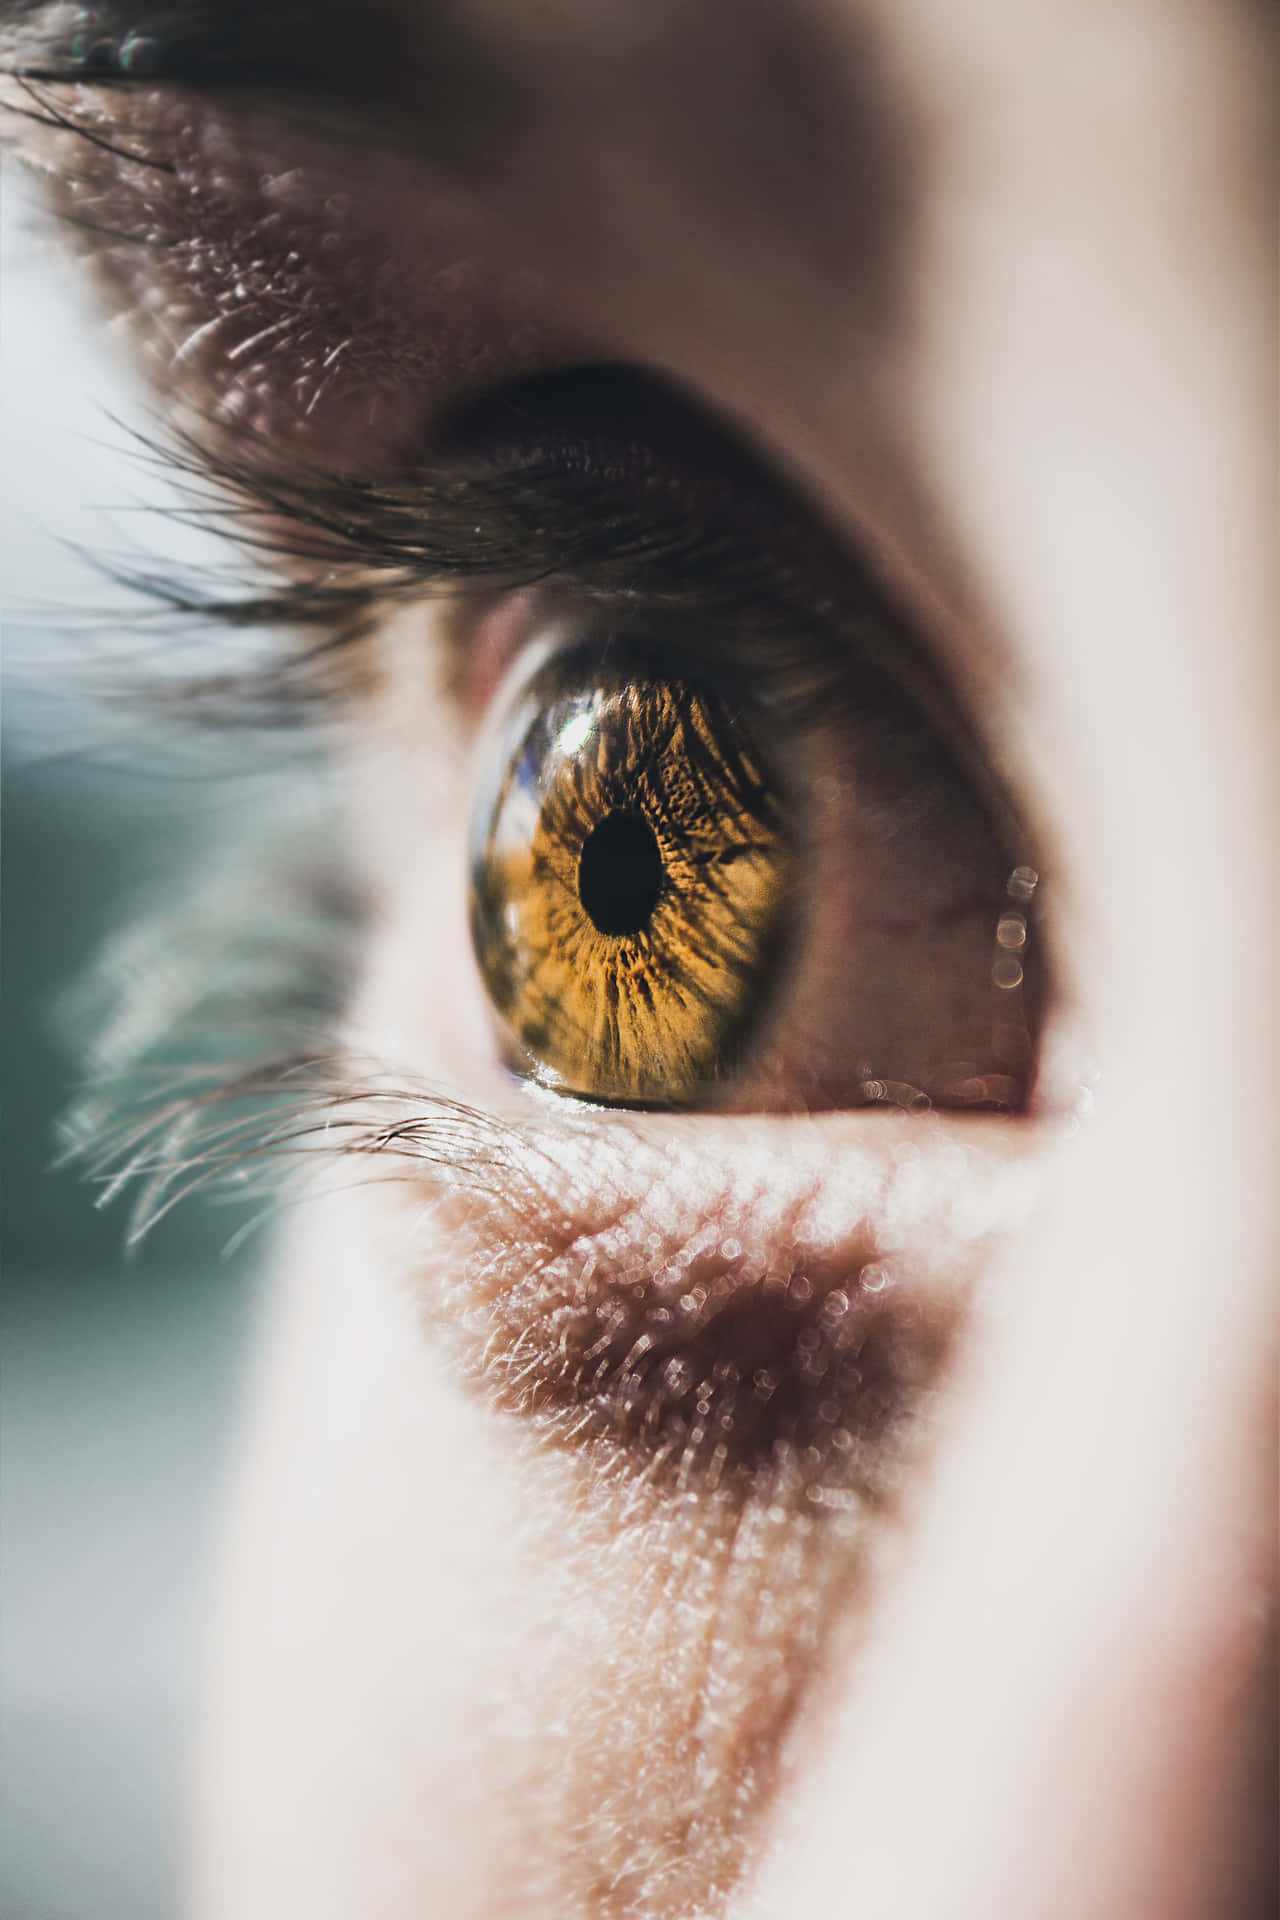 A Close Up Of A Person's Eye With A Yellow Iris